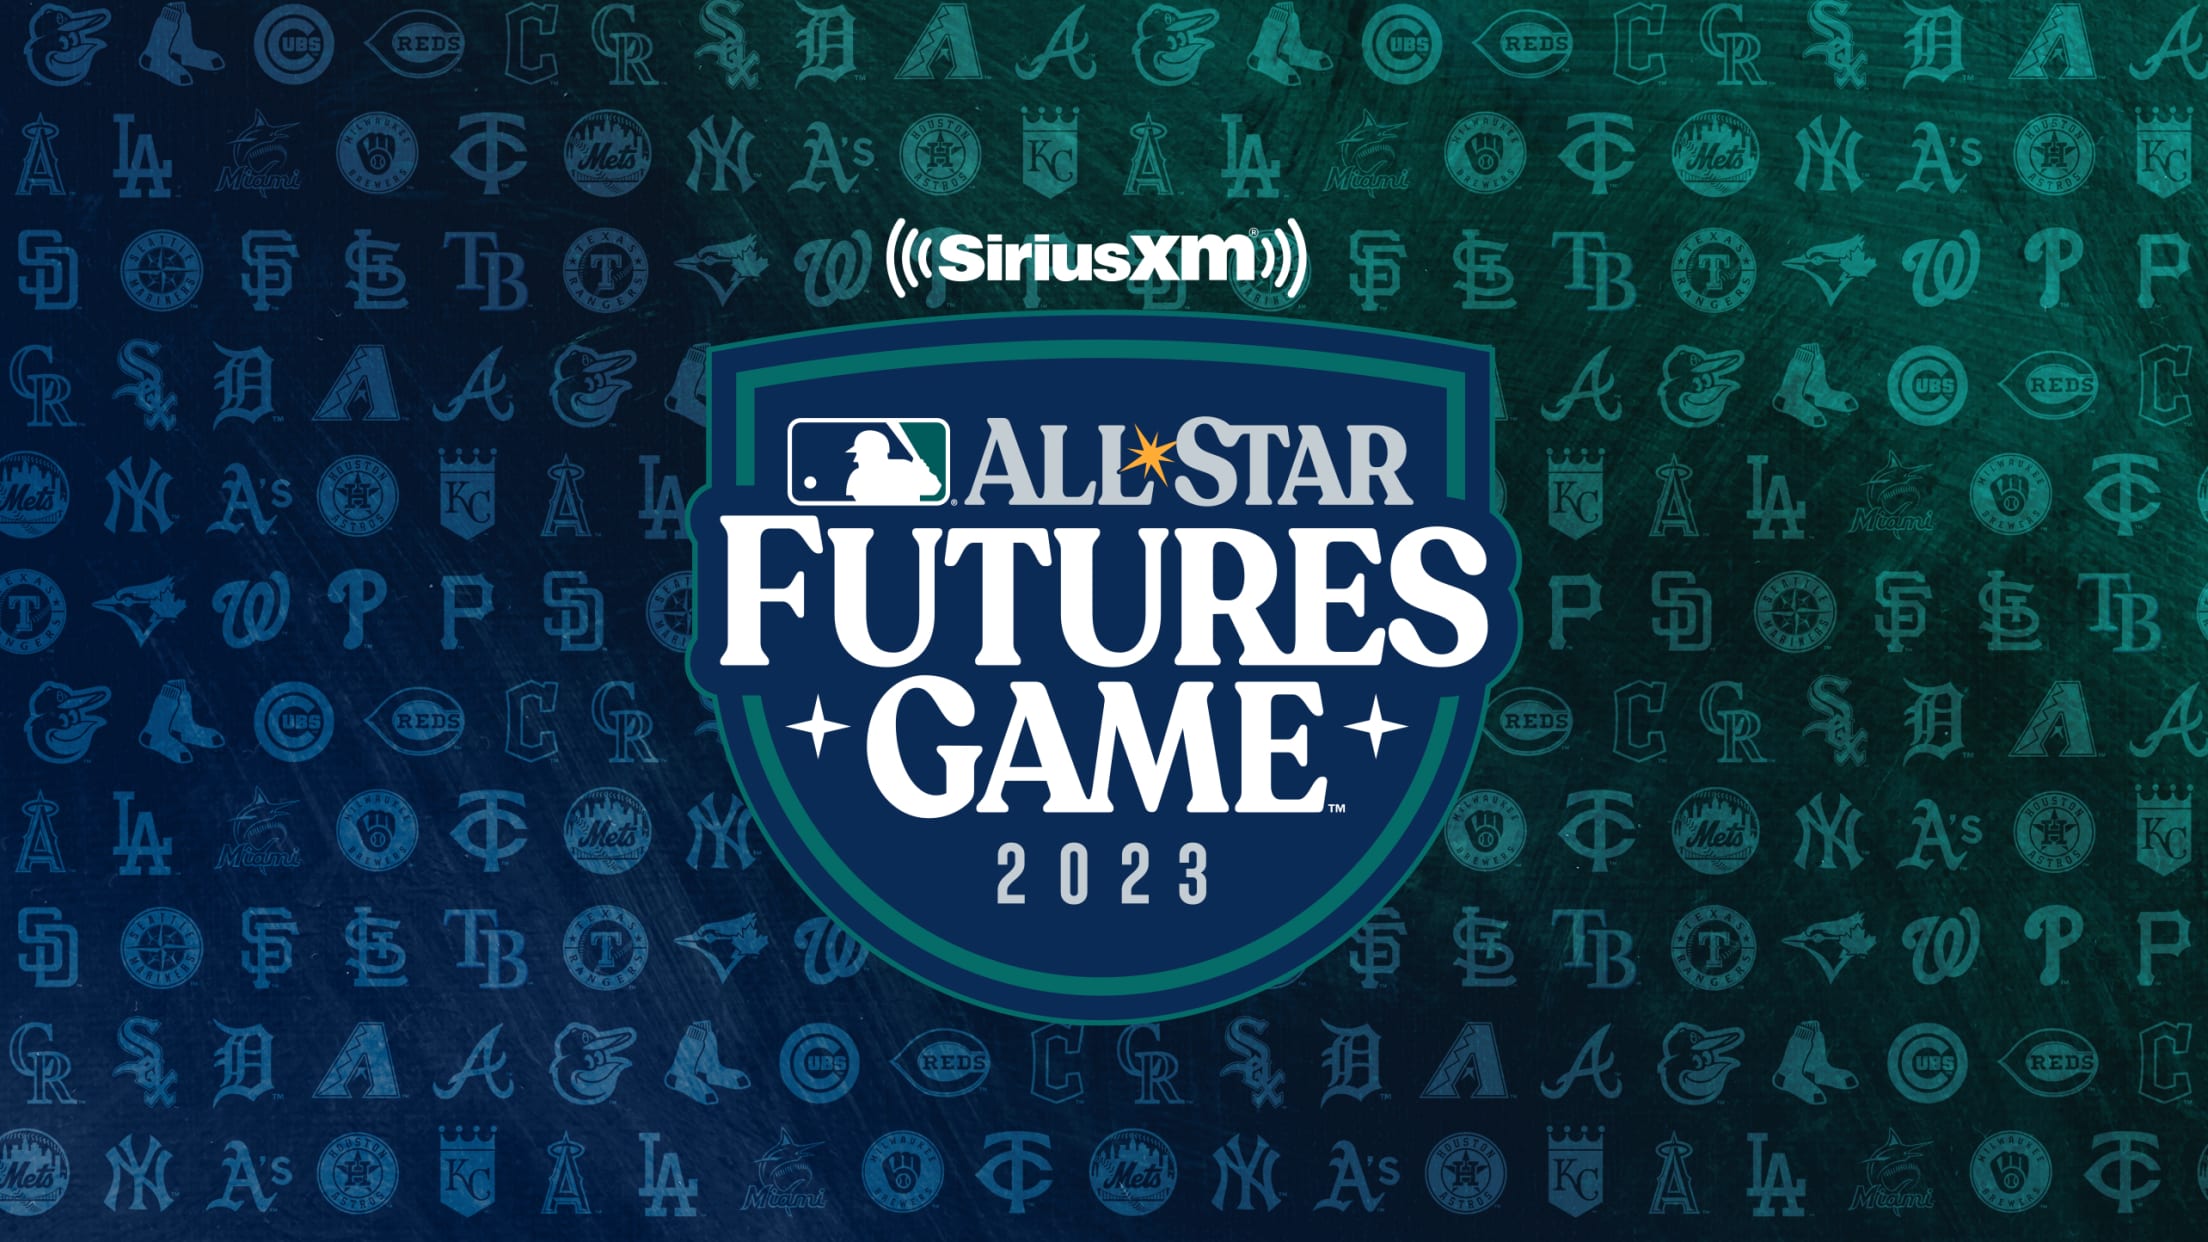 The 2023 All-Star Futures Game logo